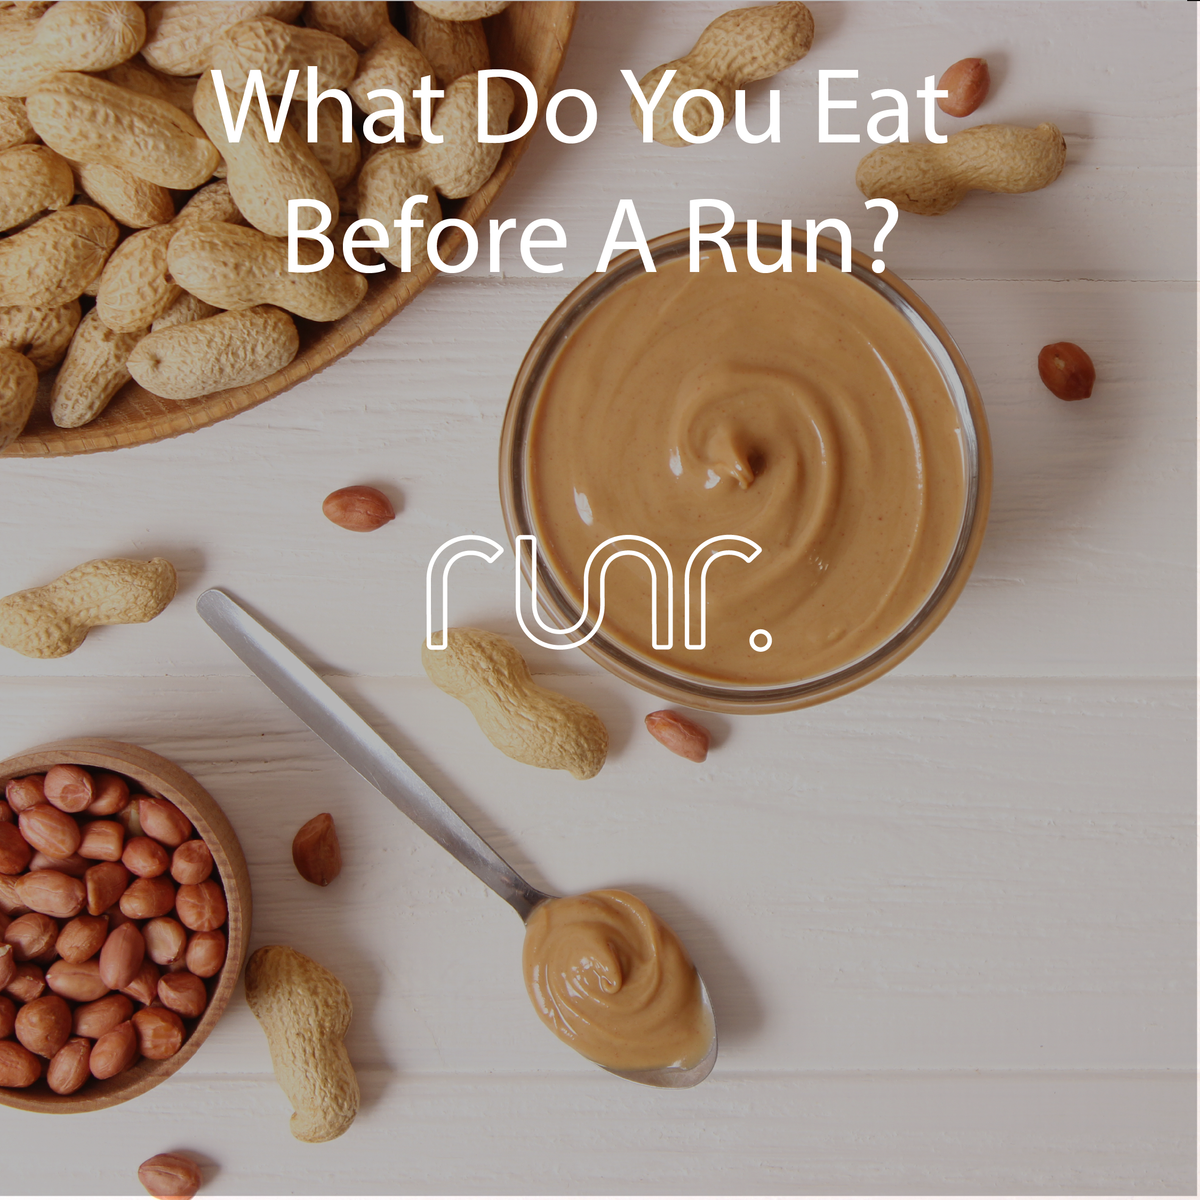 What do you eat before going for a run?